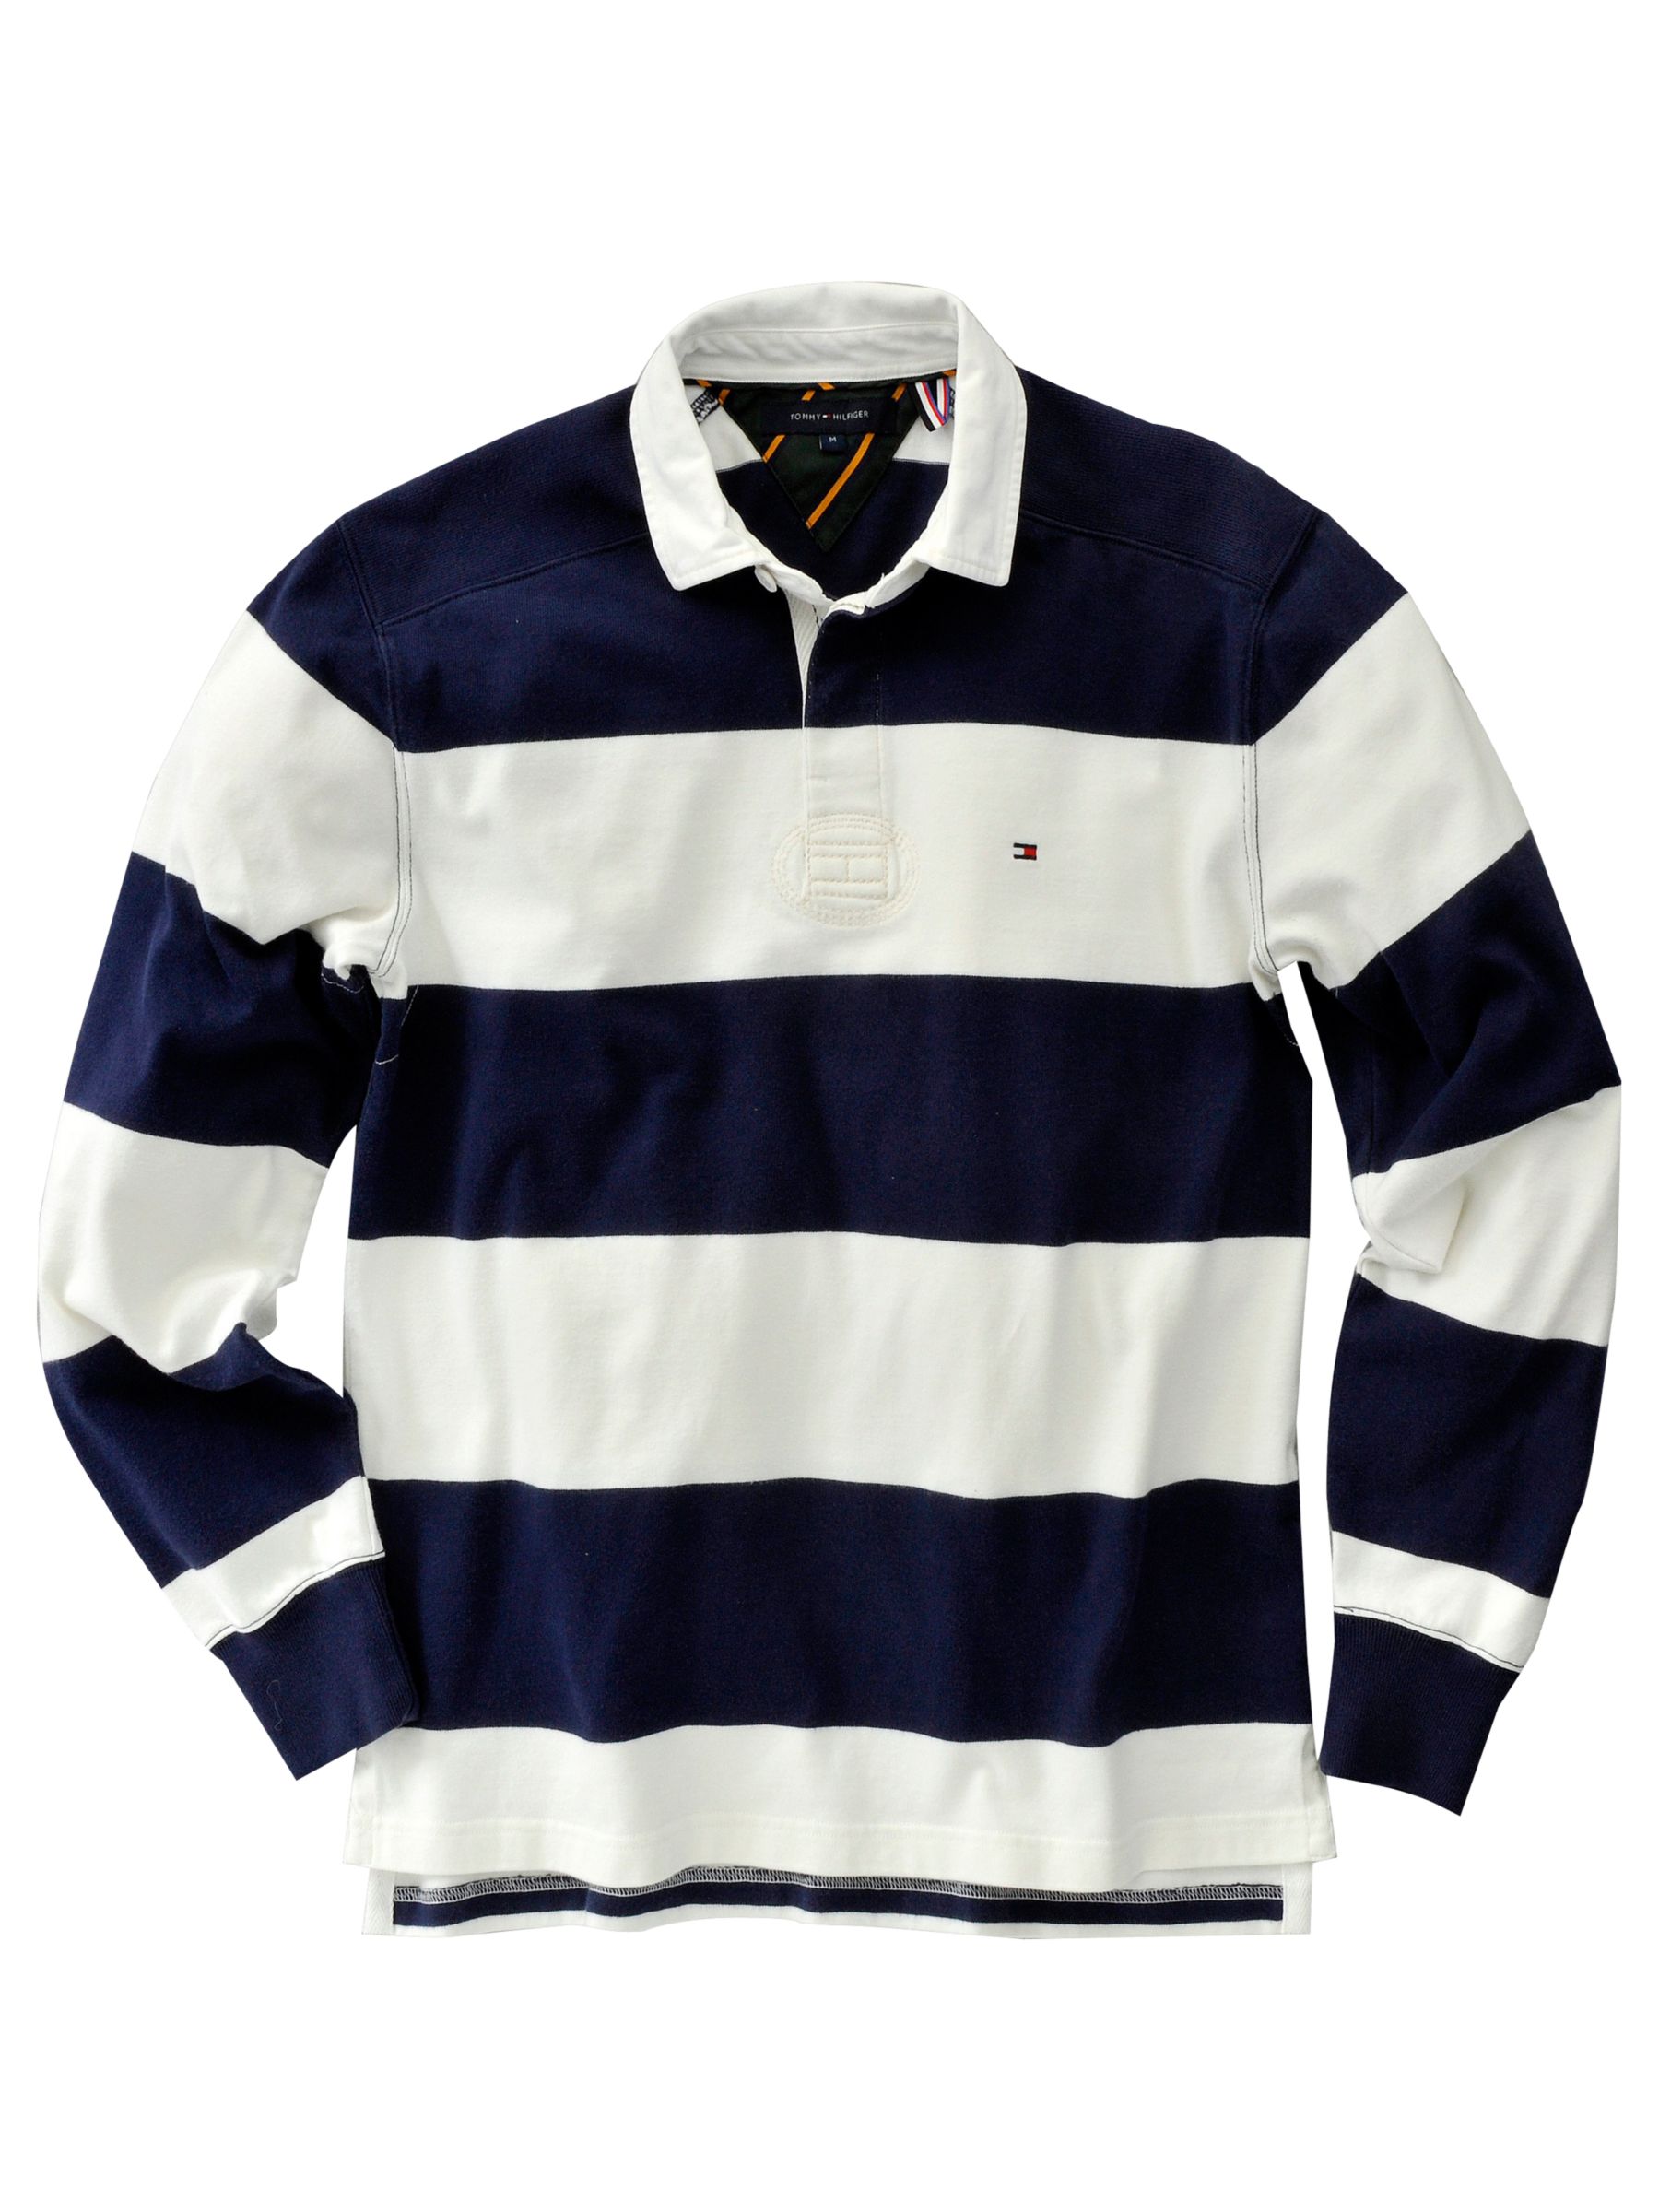 Tommy Hilfiger Patrick Rugby Shirt, Navy/white